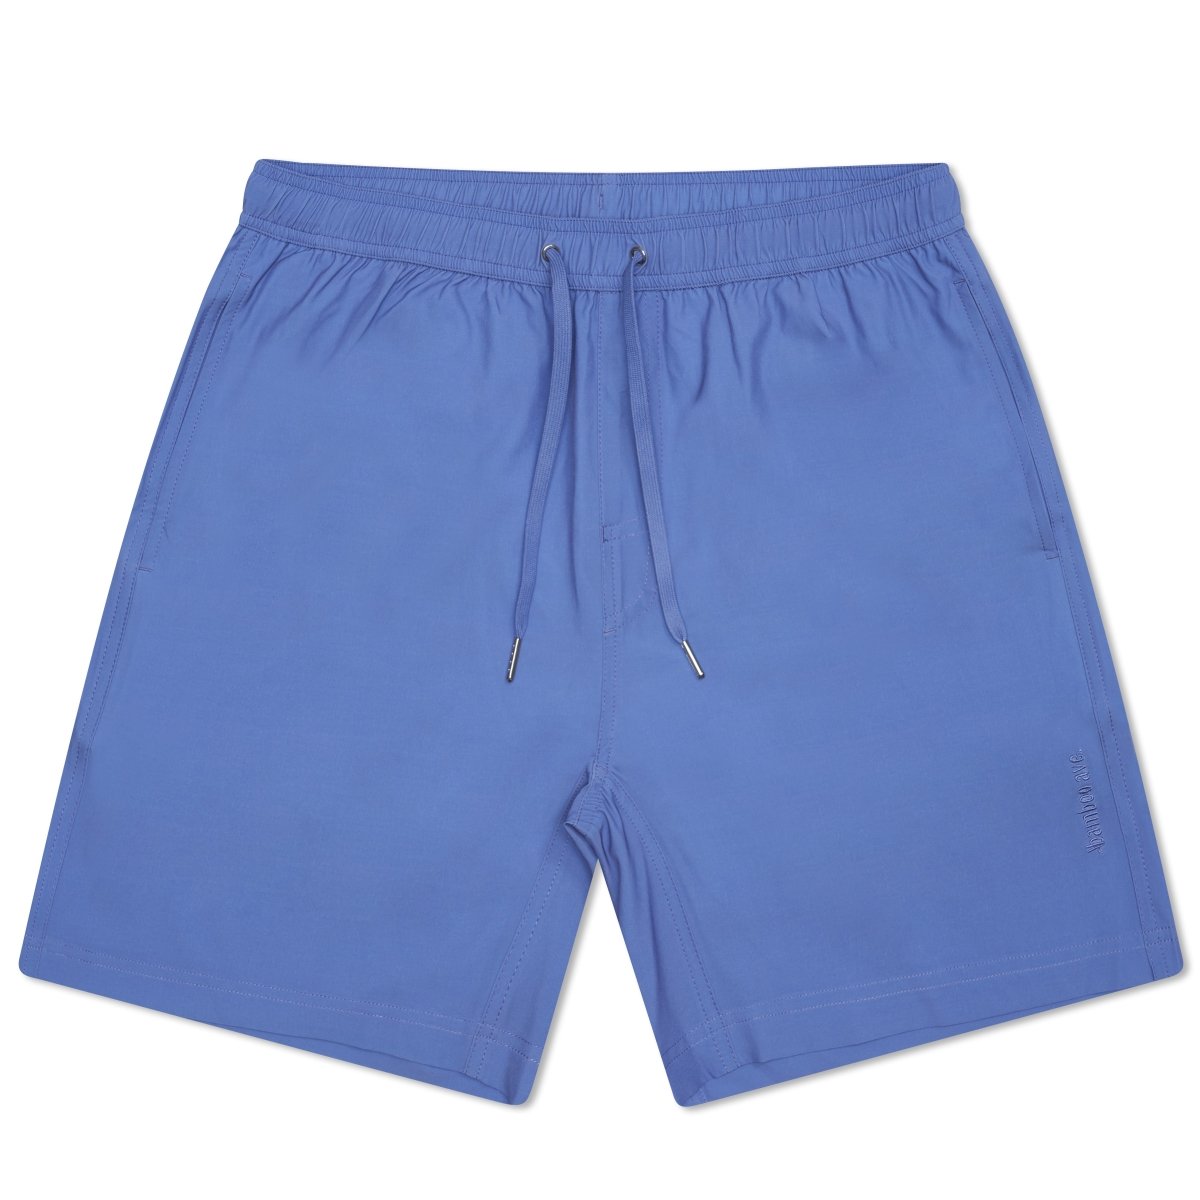 Run This Town 7" - Periwinkle Shorts (Ships 6/19) - Bamboo Ave. - Men's Shorts